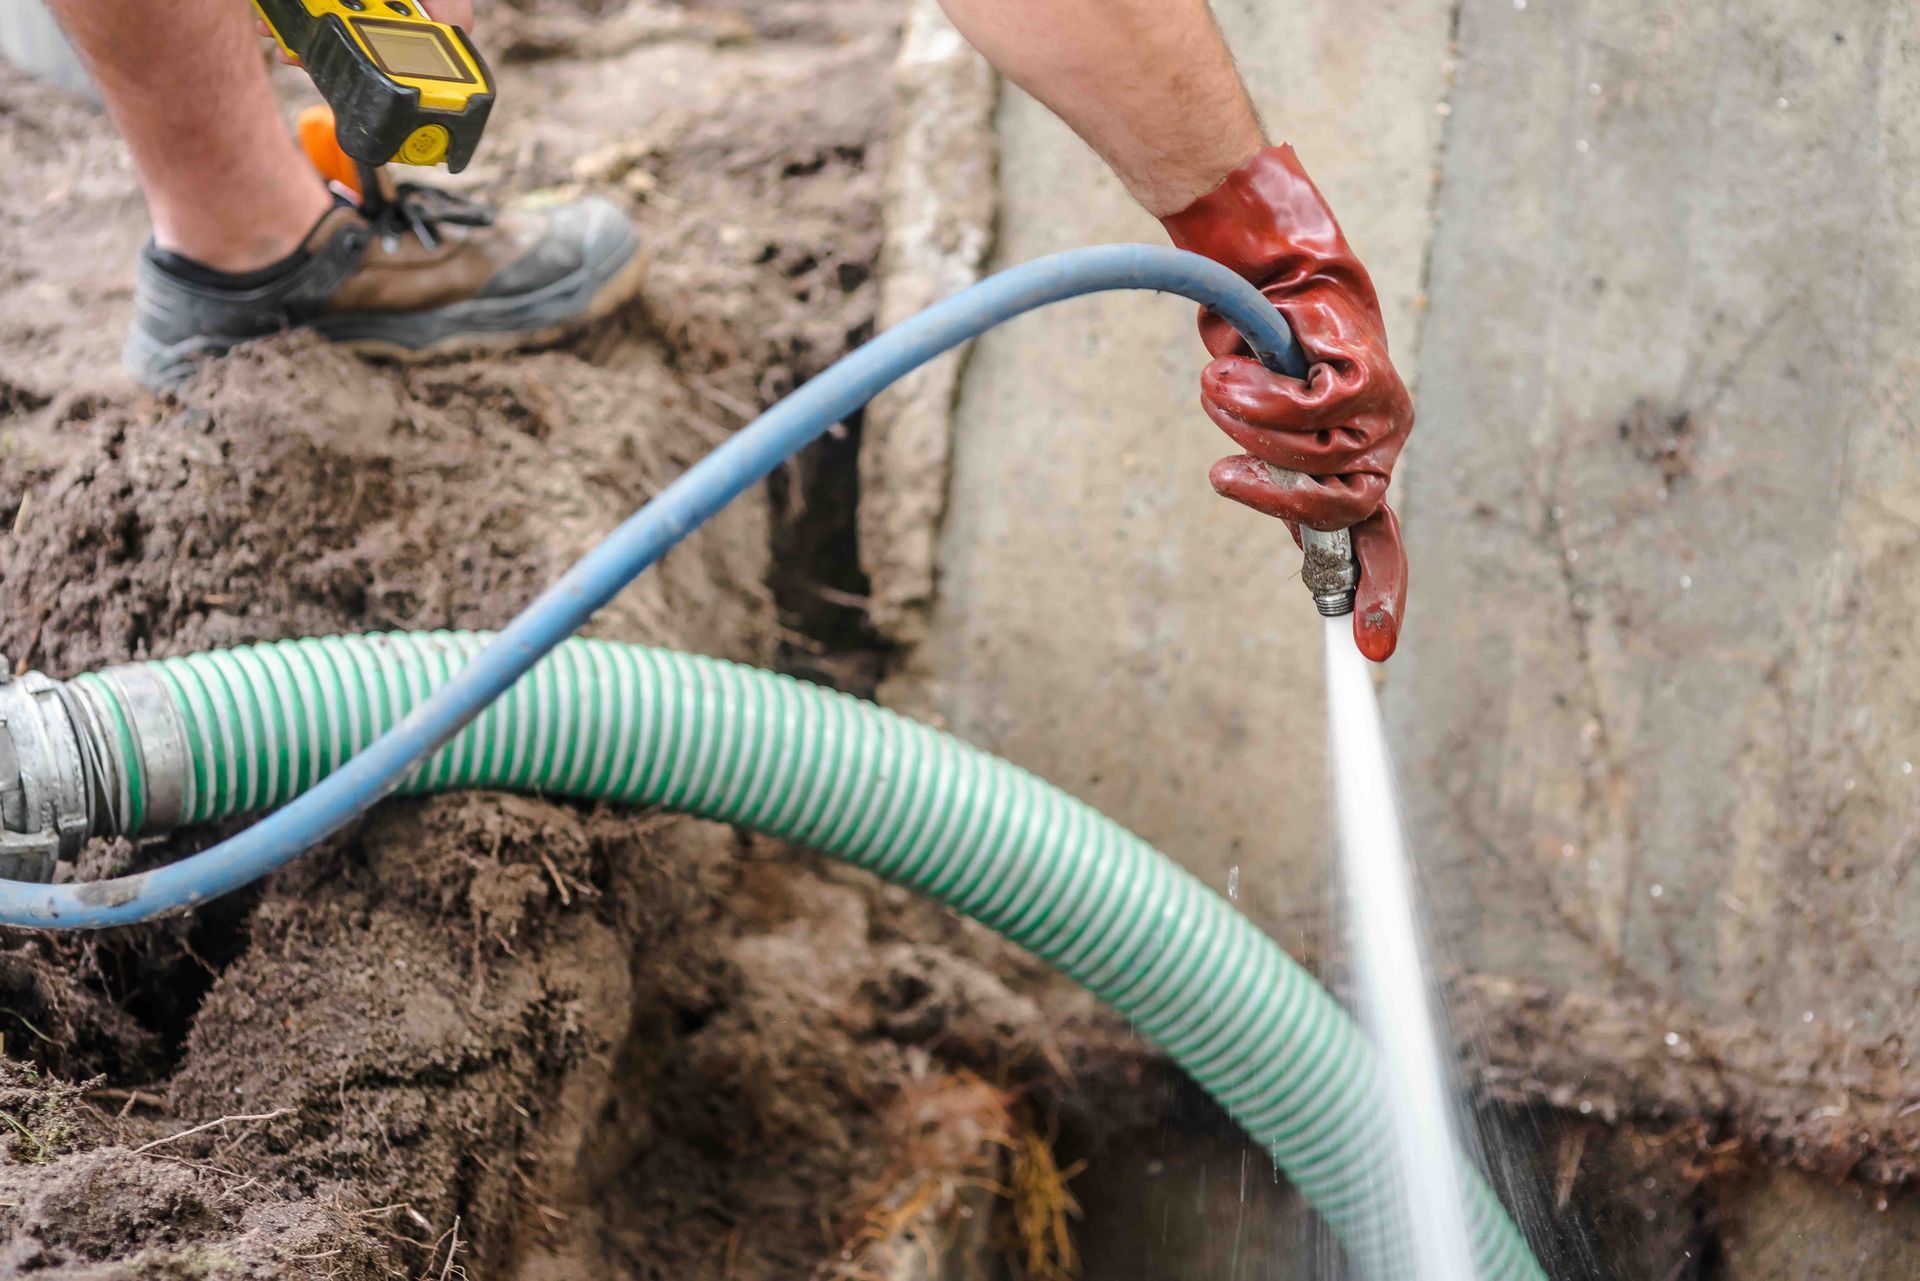 a person spraying water into a septic tank out of a high pressure hose.